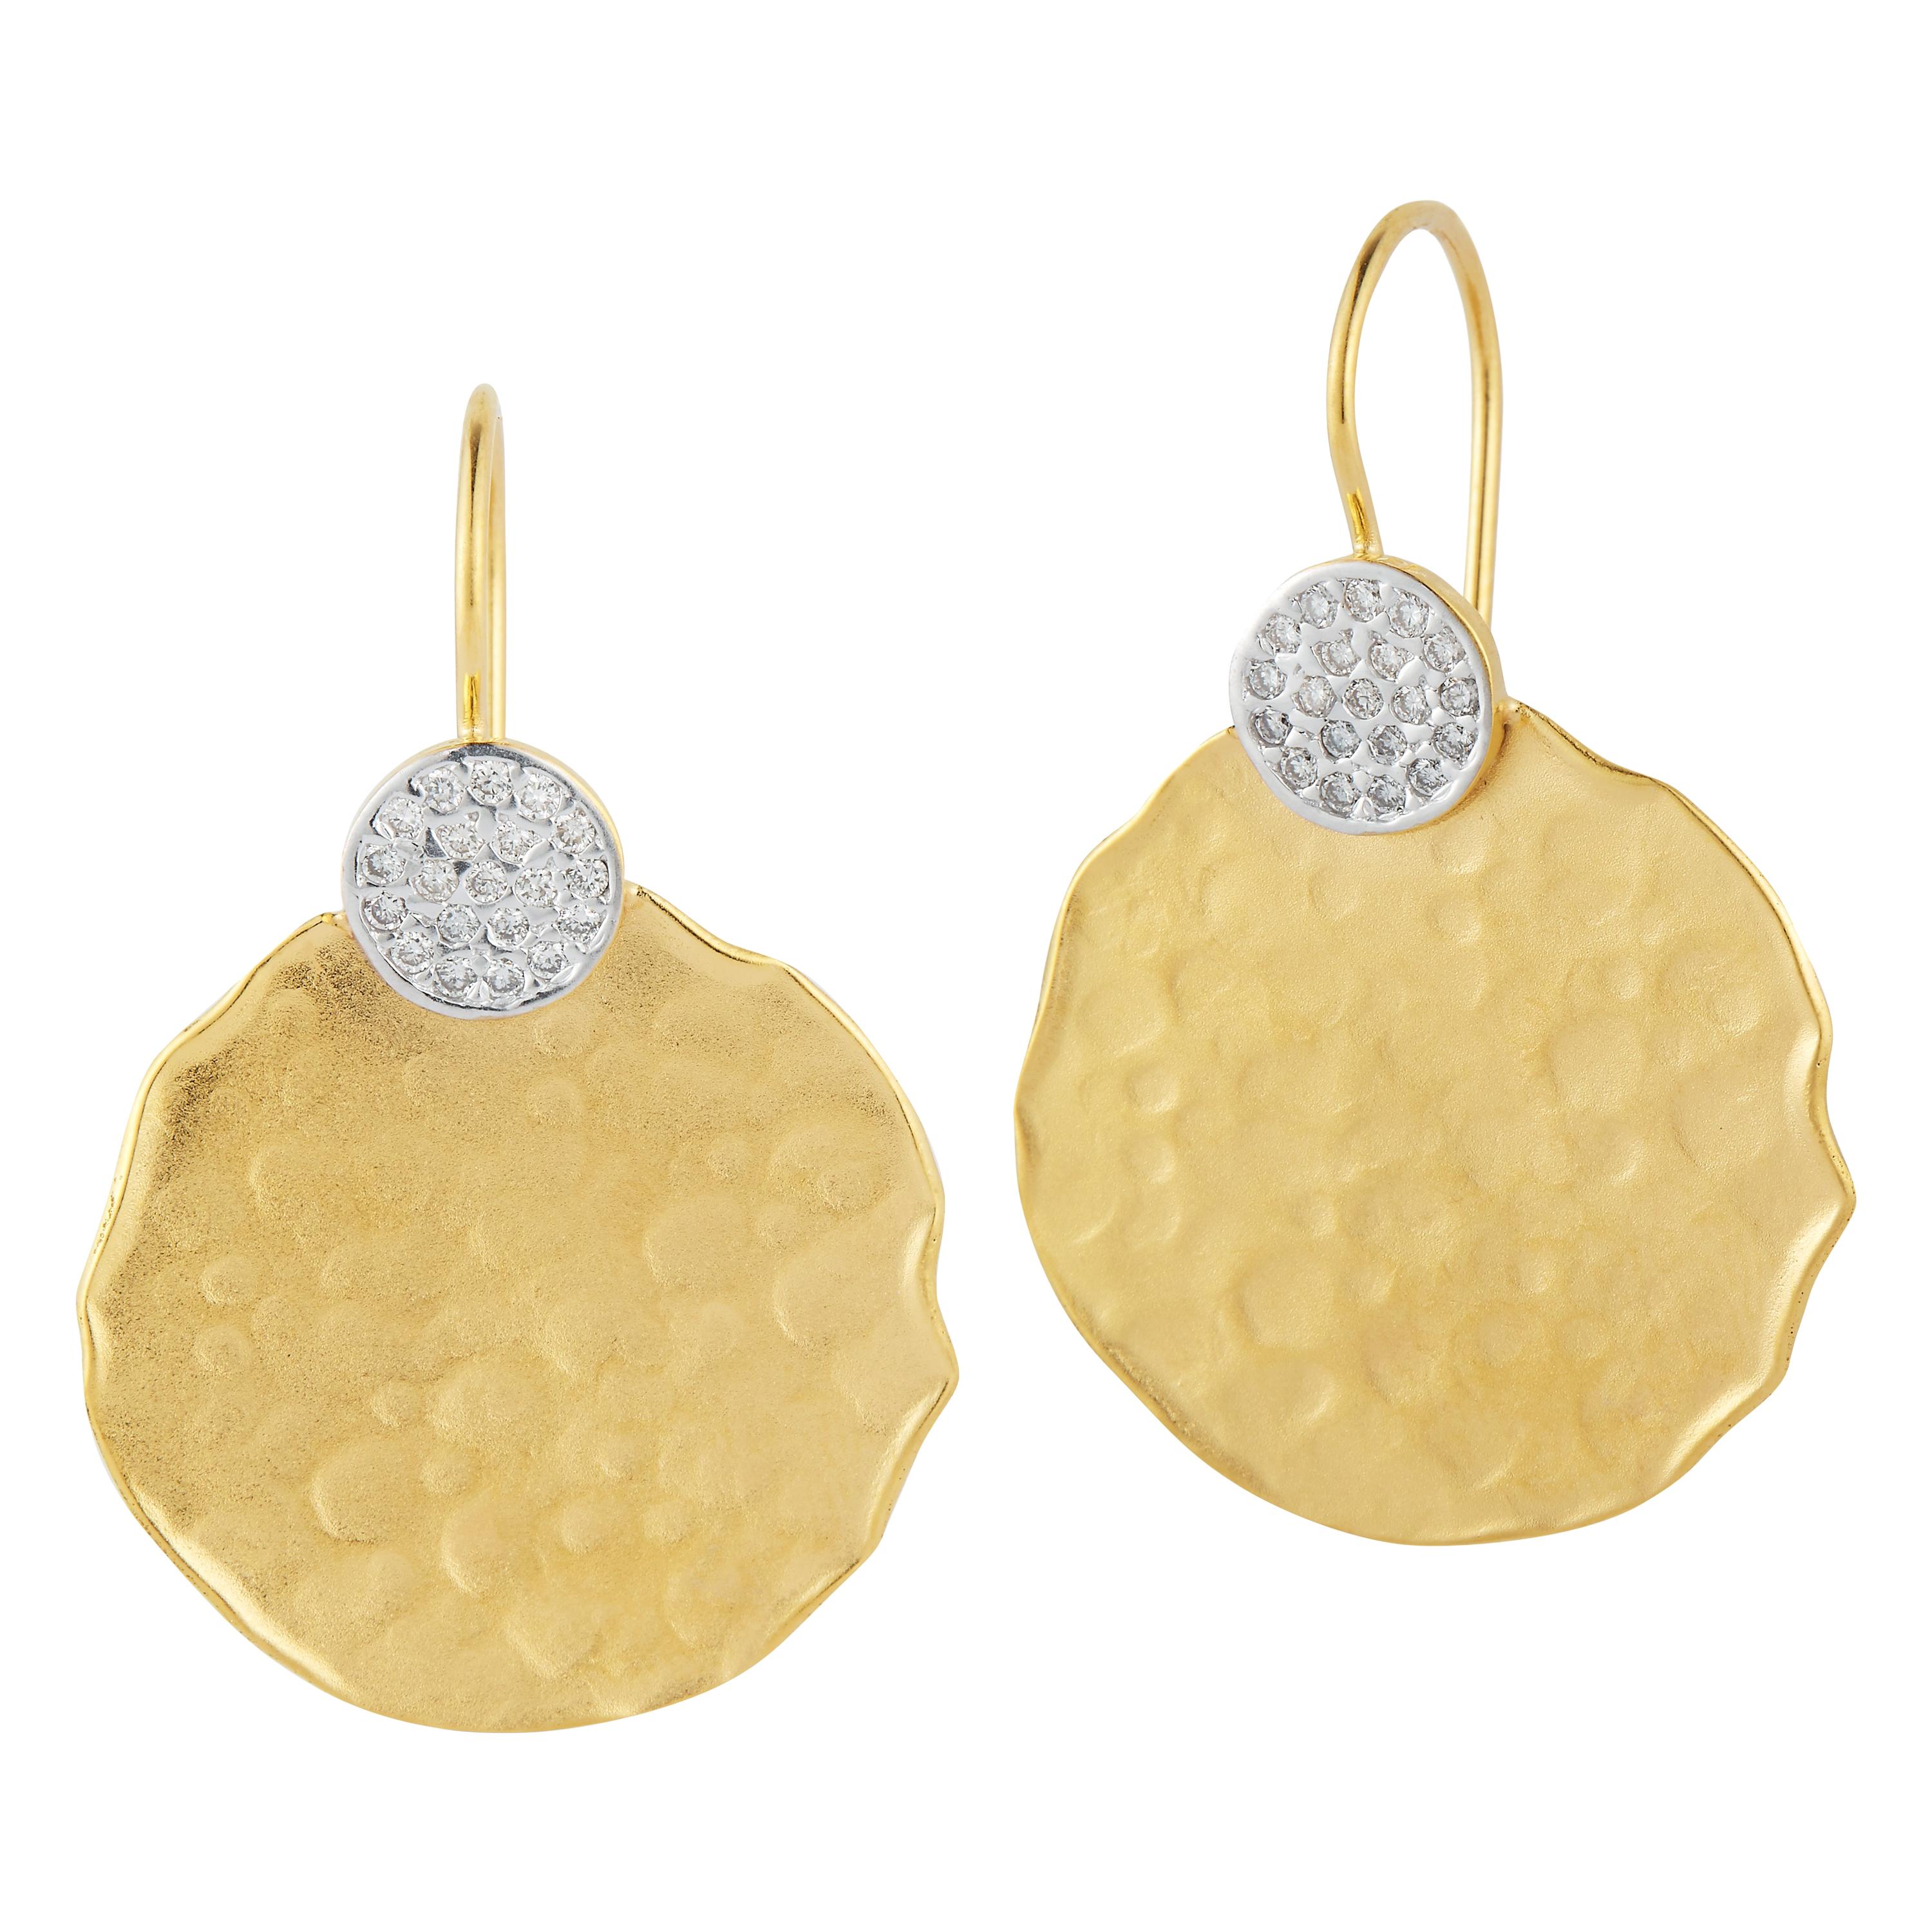 Handcrafted 14 Karat Yellow Gold Hammered Round-Shaped Earrings